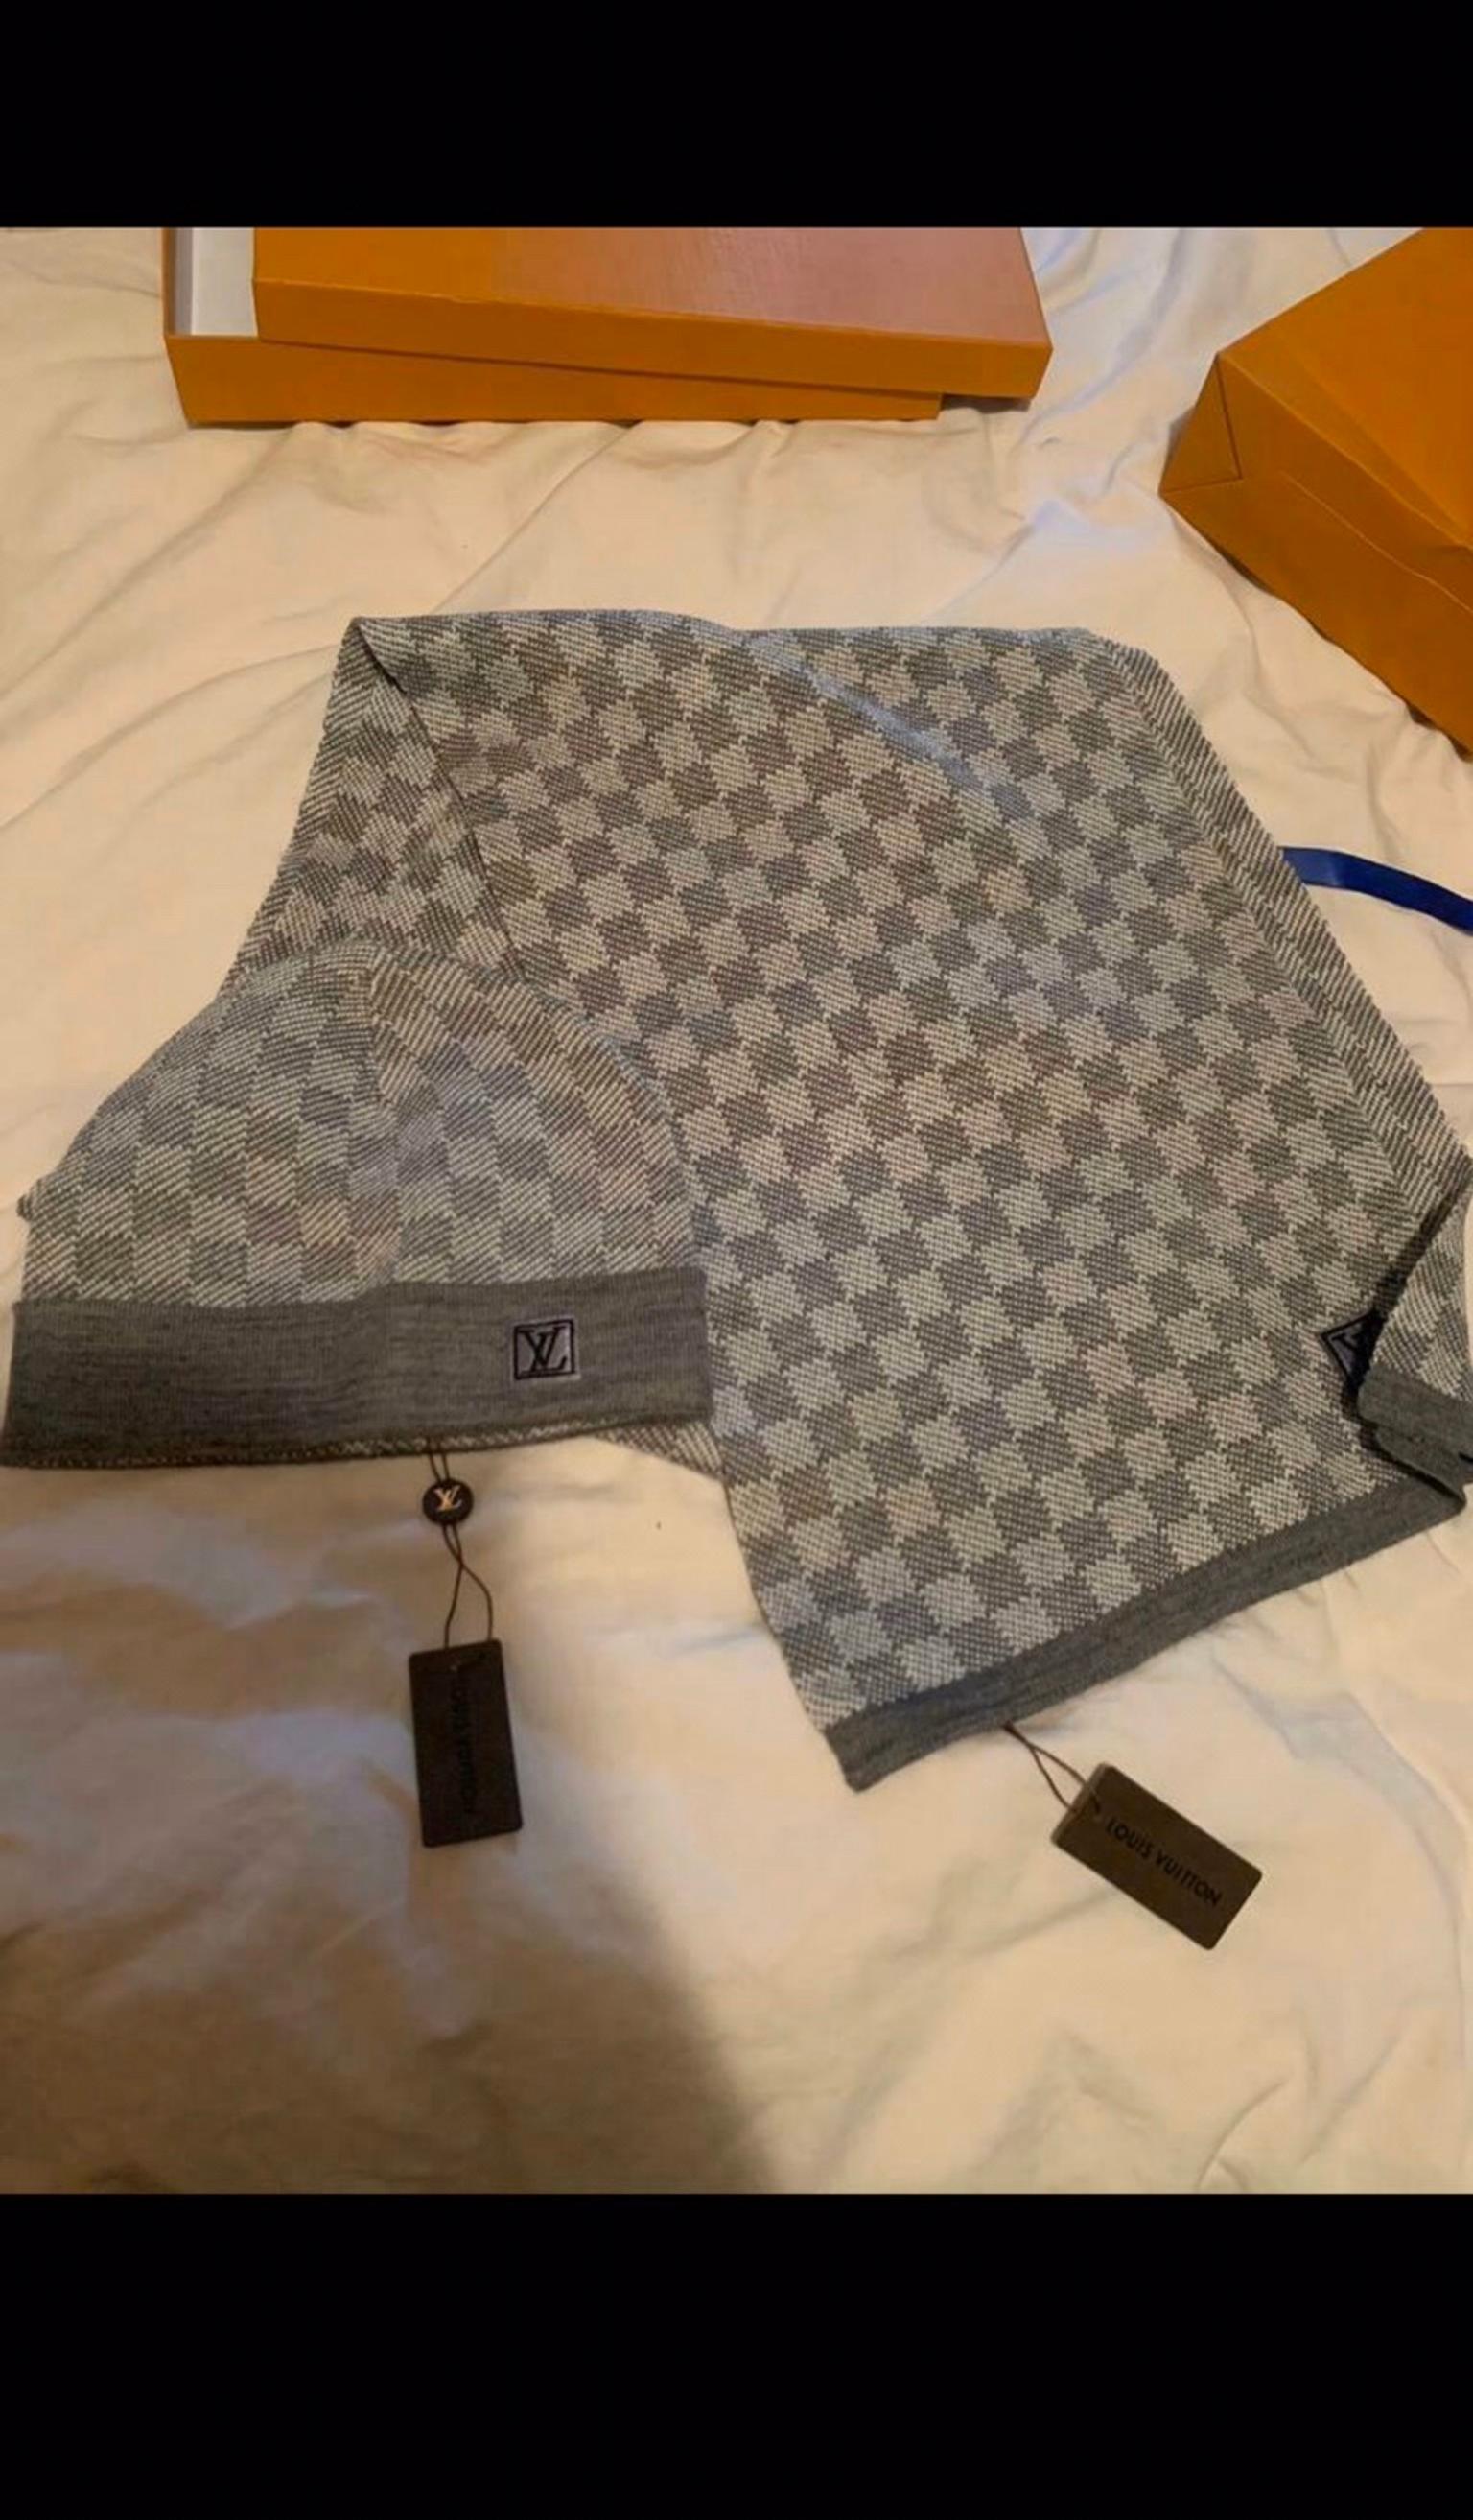 Louis Vuitton hat and scarf in Daventry for £150.00 for sale | Shpock